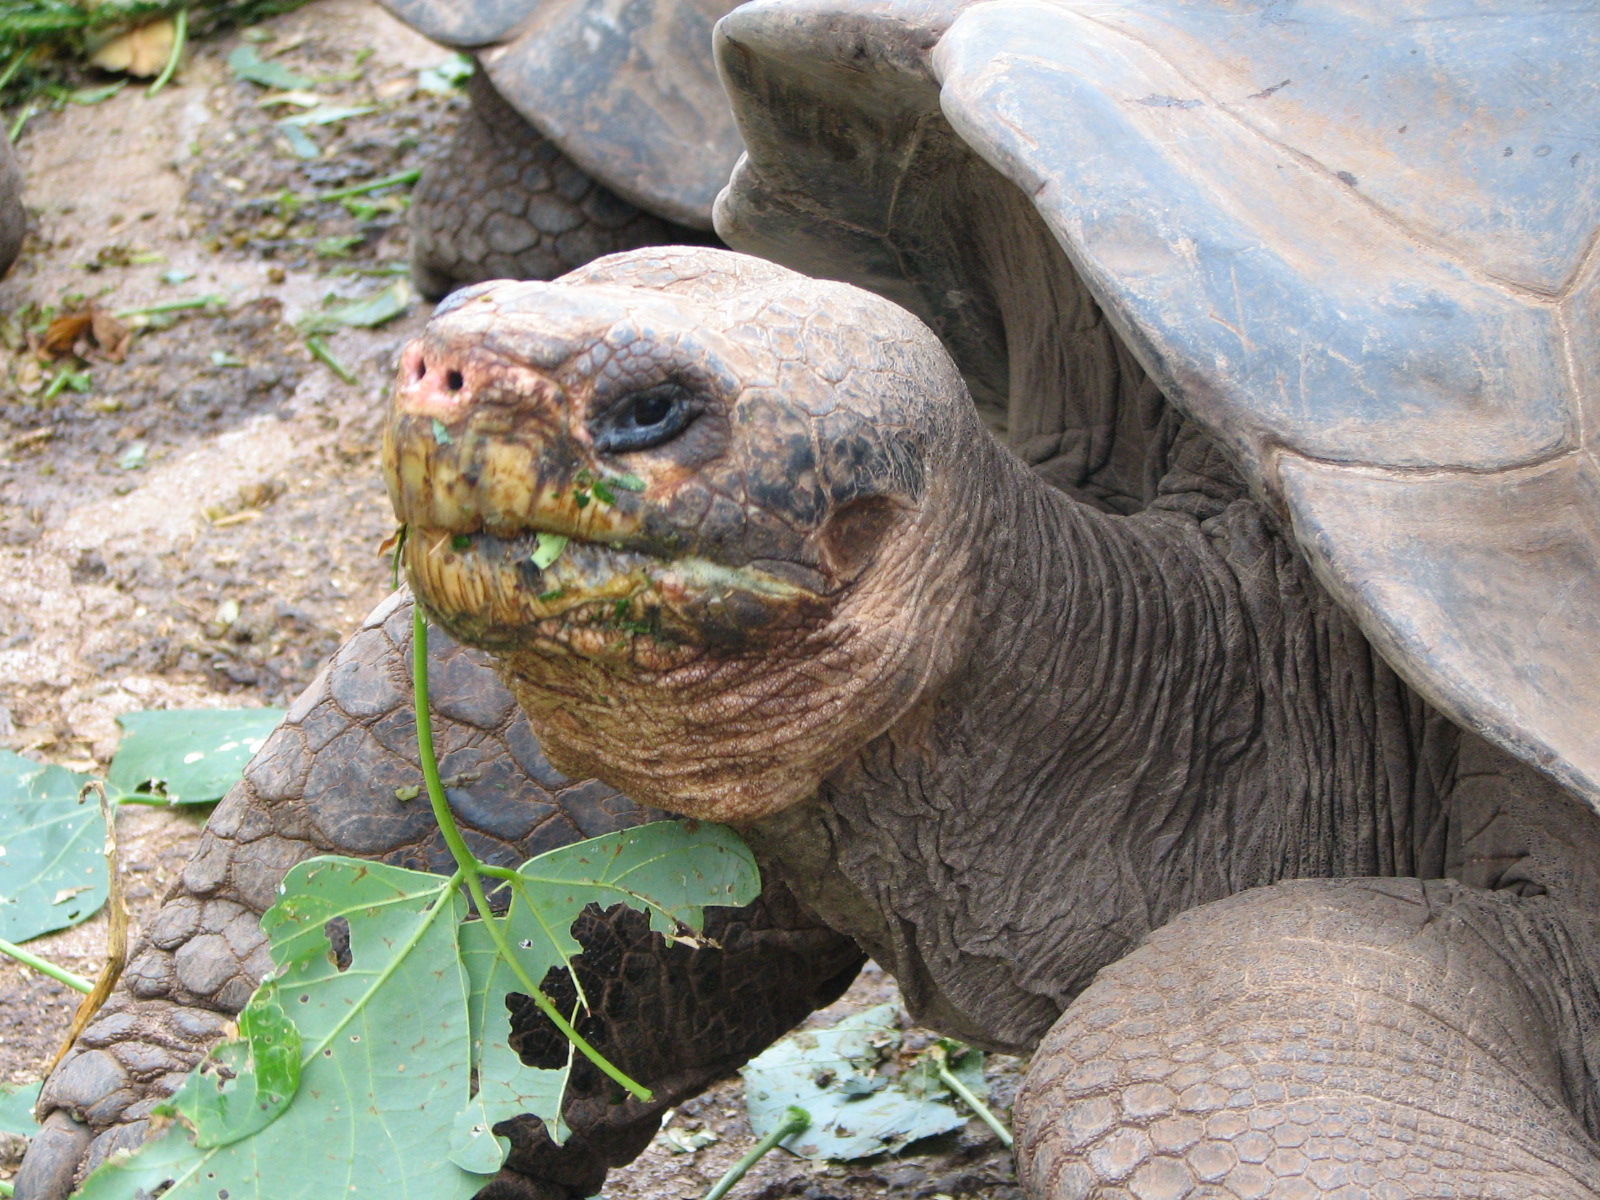 giant tortoise in the Galapagos islands